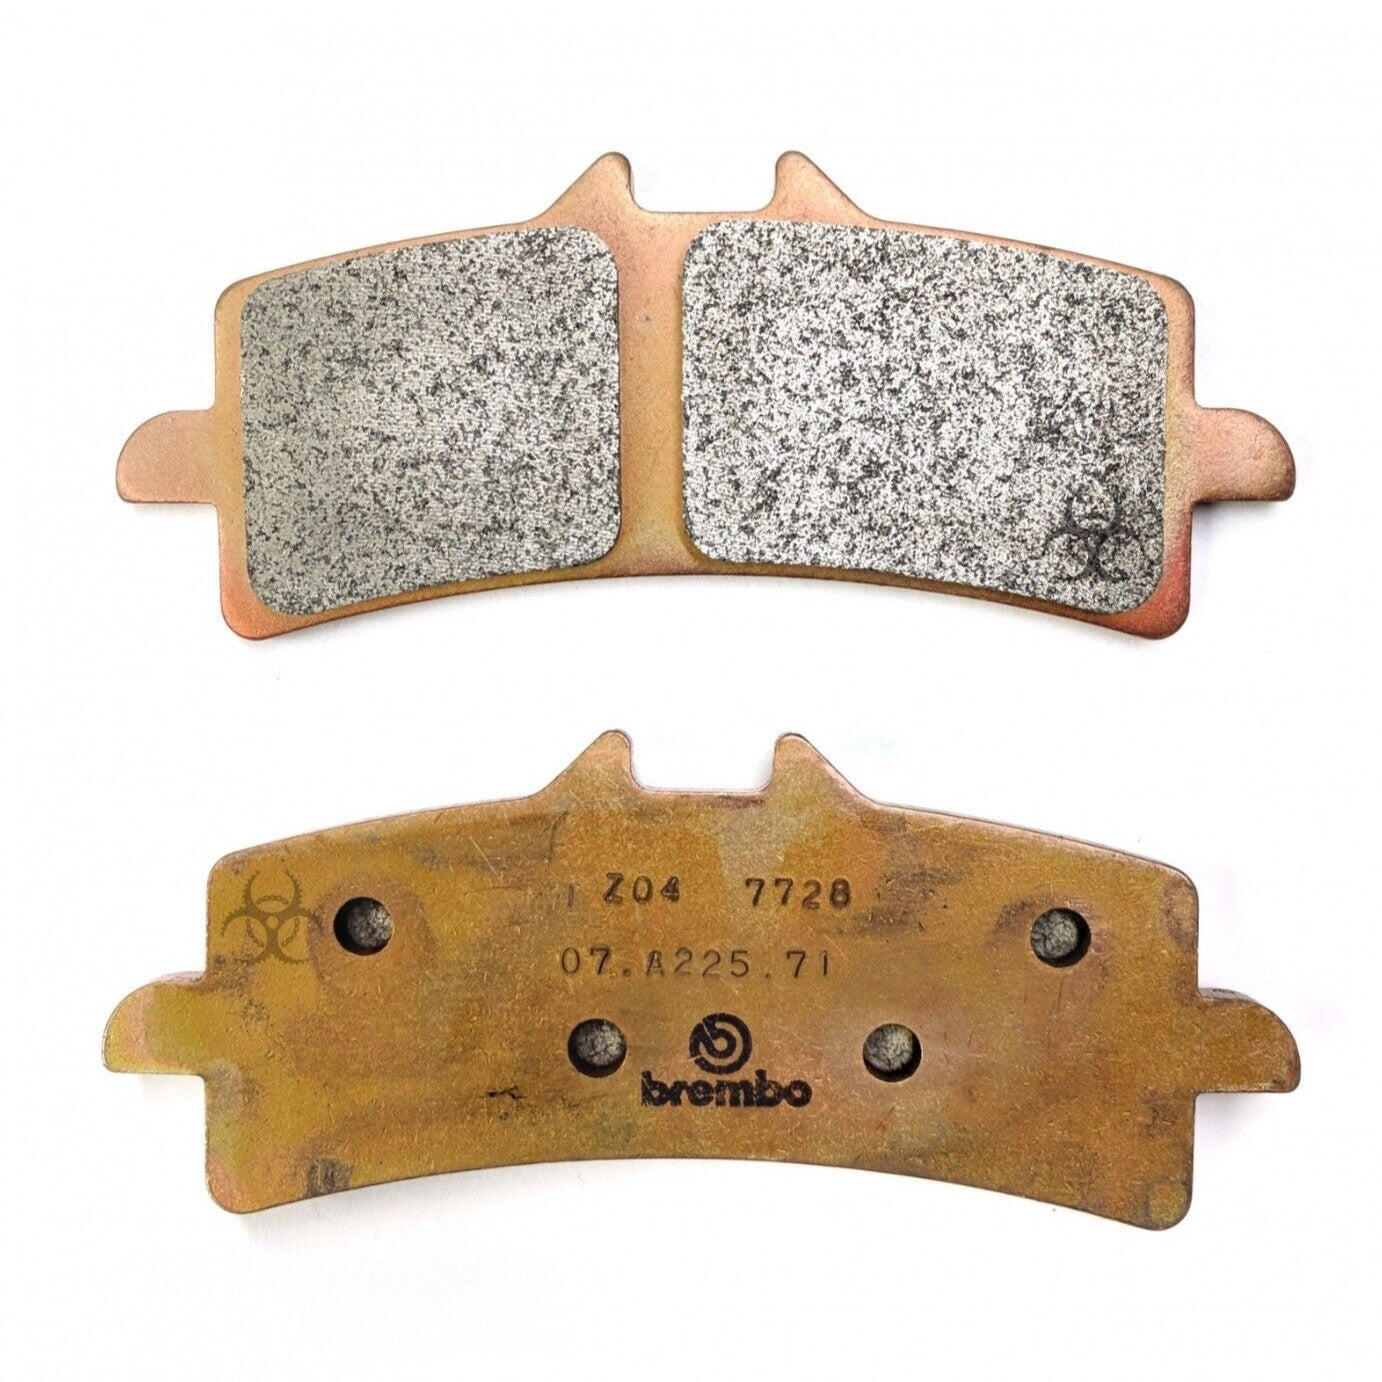 Brembo Z04 Racing Brake Pads for Brembo M4 / M50 and GP4-RX